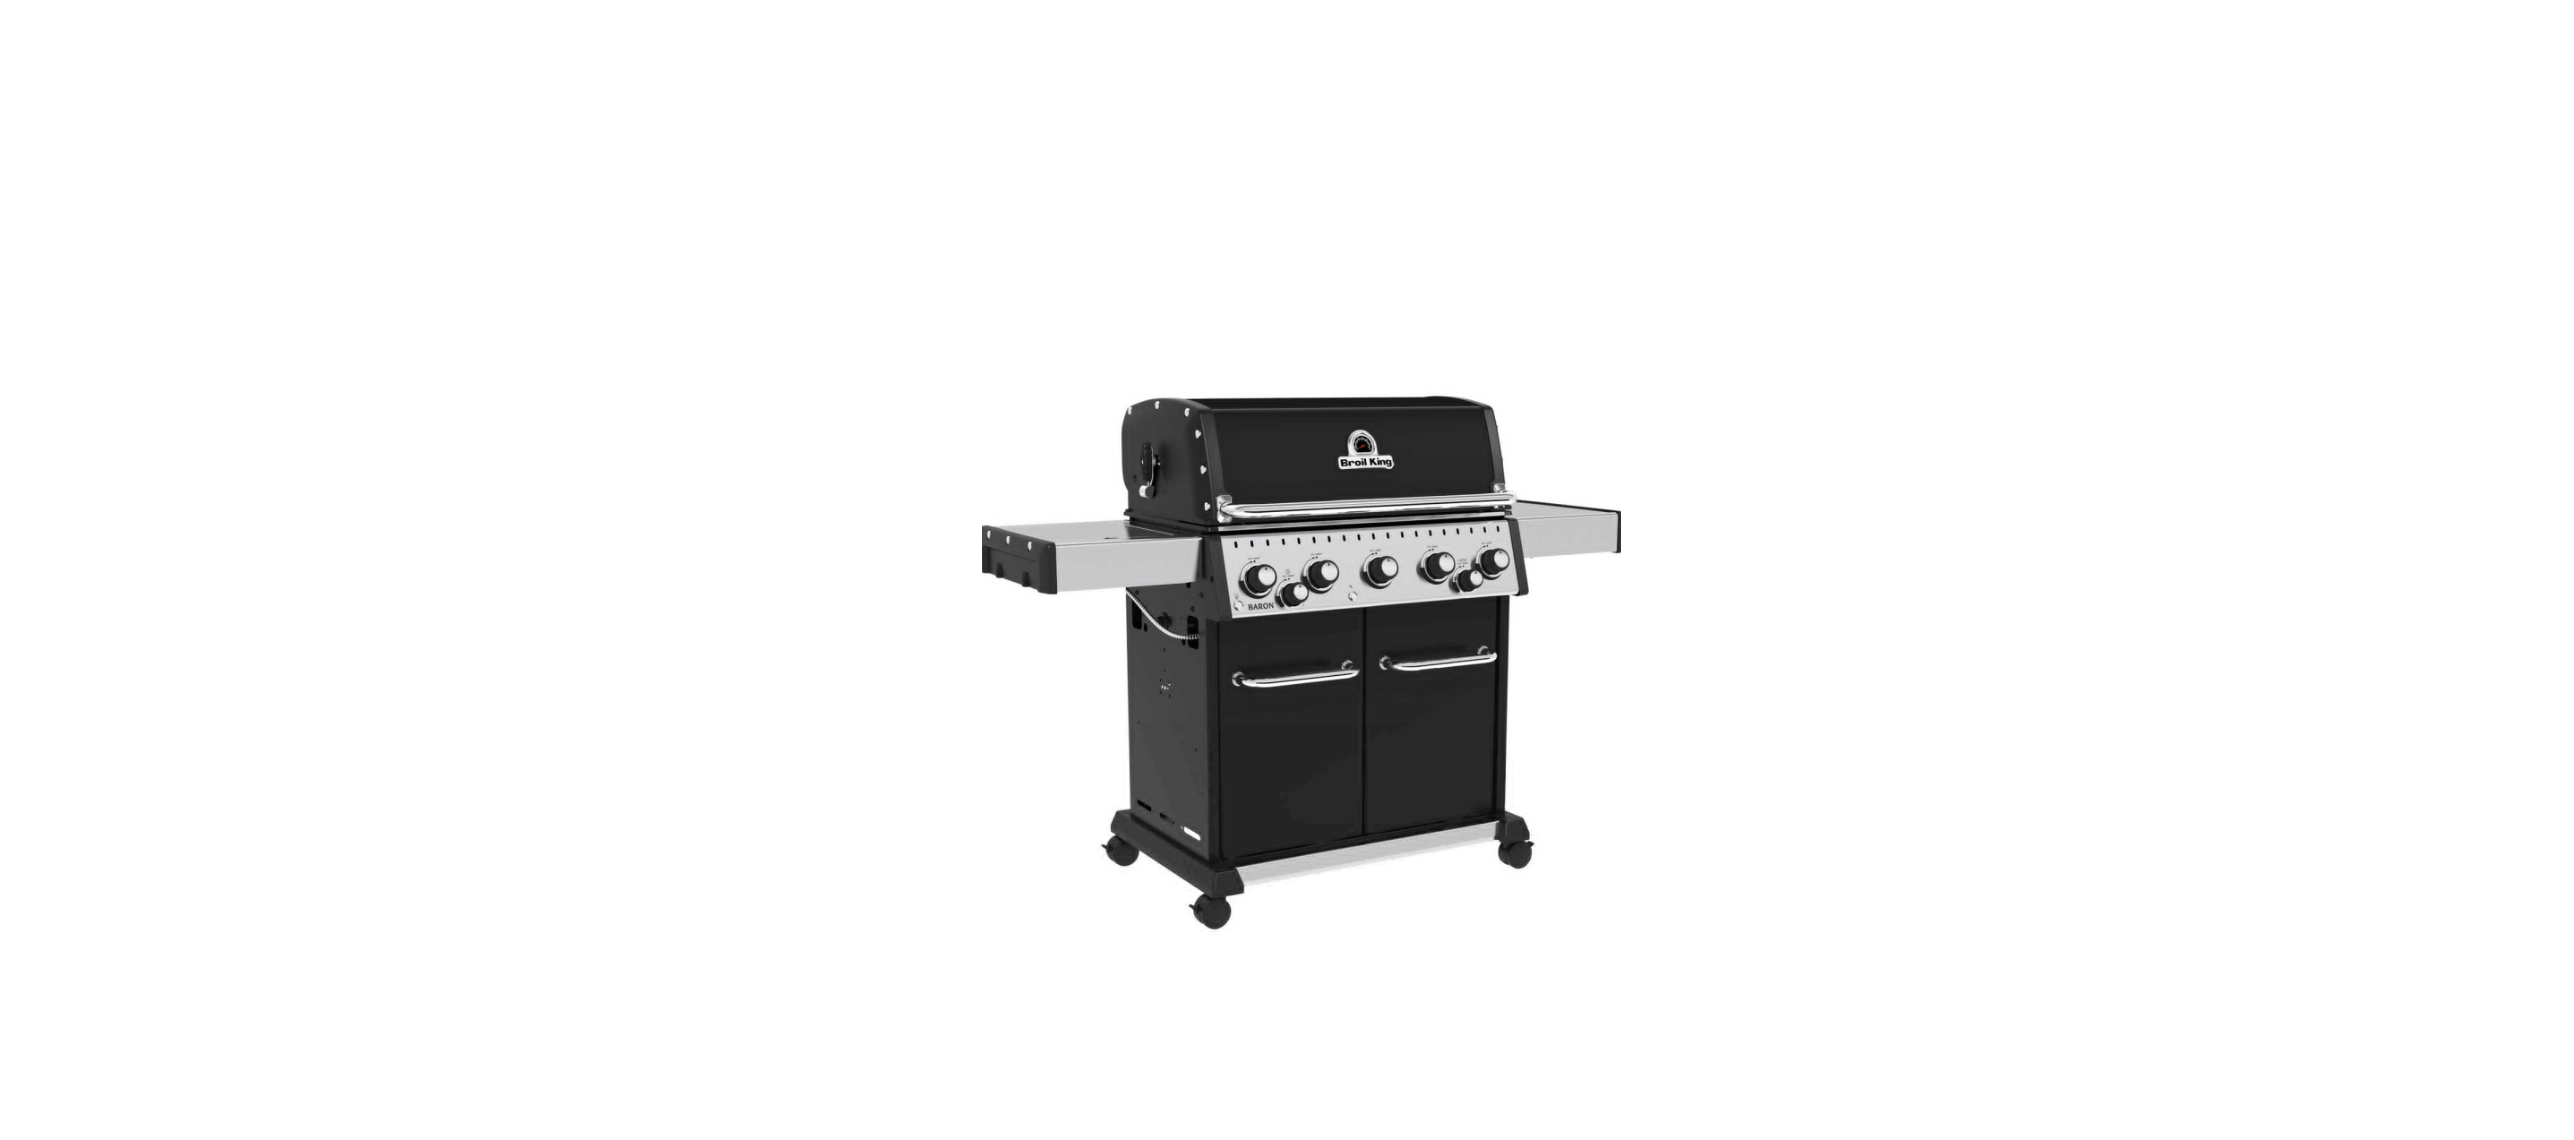 Read more about the article Broil King 20094 Freestanding Propane Gas Grill Guide